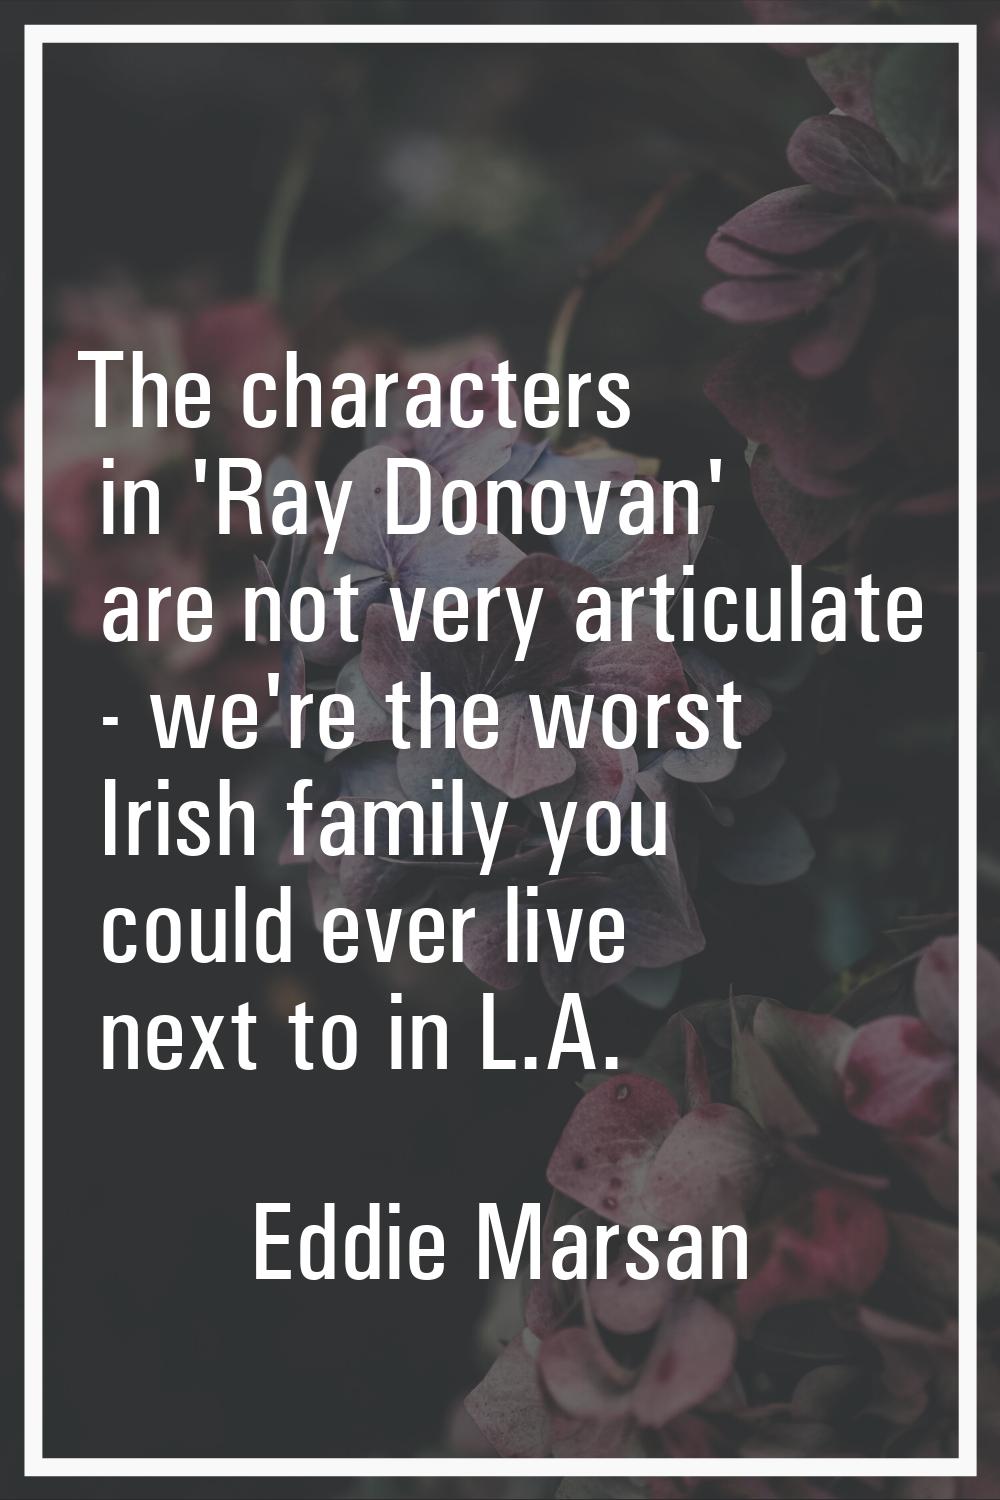 The characters in 'Ray Donovan' are not very articulate - we're the worst Irish family you could ev